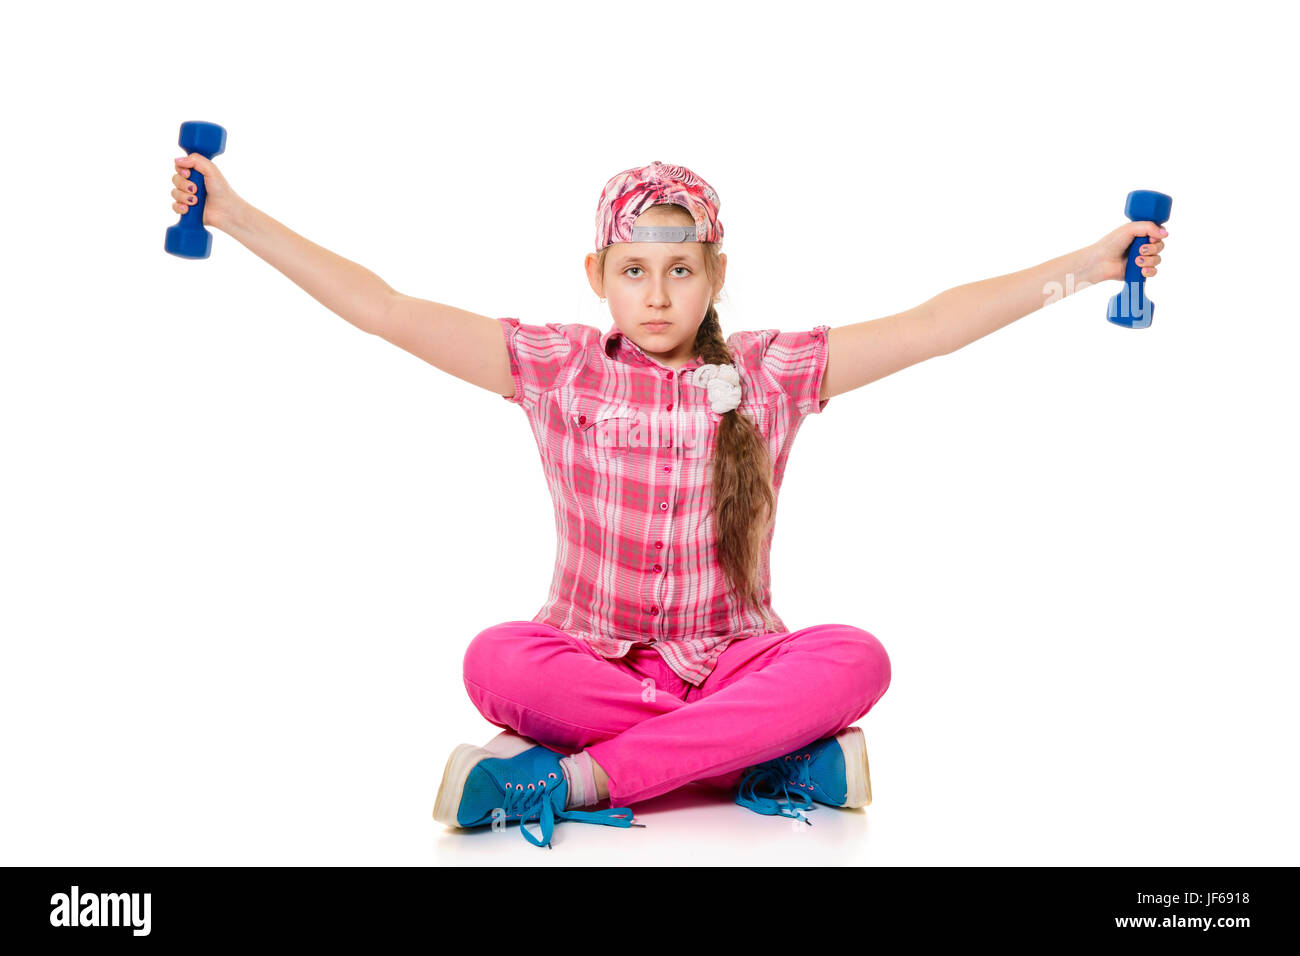 Girl is engaged with dumbbells, sitting on the floor. Isolated on white background Stock Photo